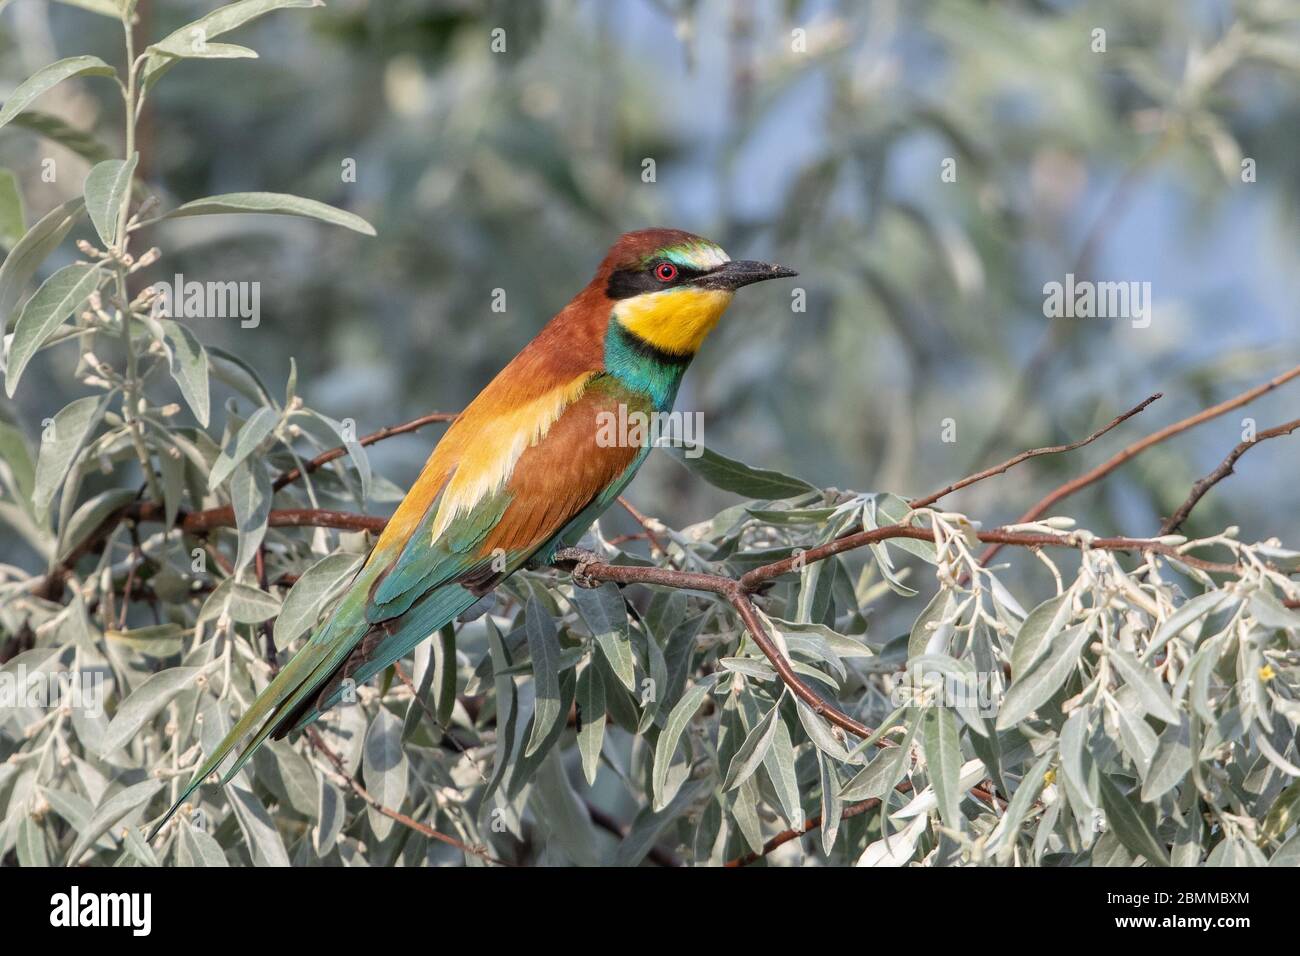 European Bee eater (Merops Apiaster) perchingin a tree surrounded by foliage Stock Photo